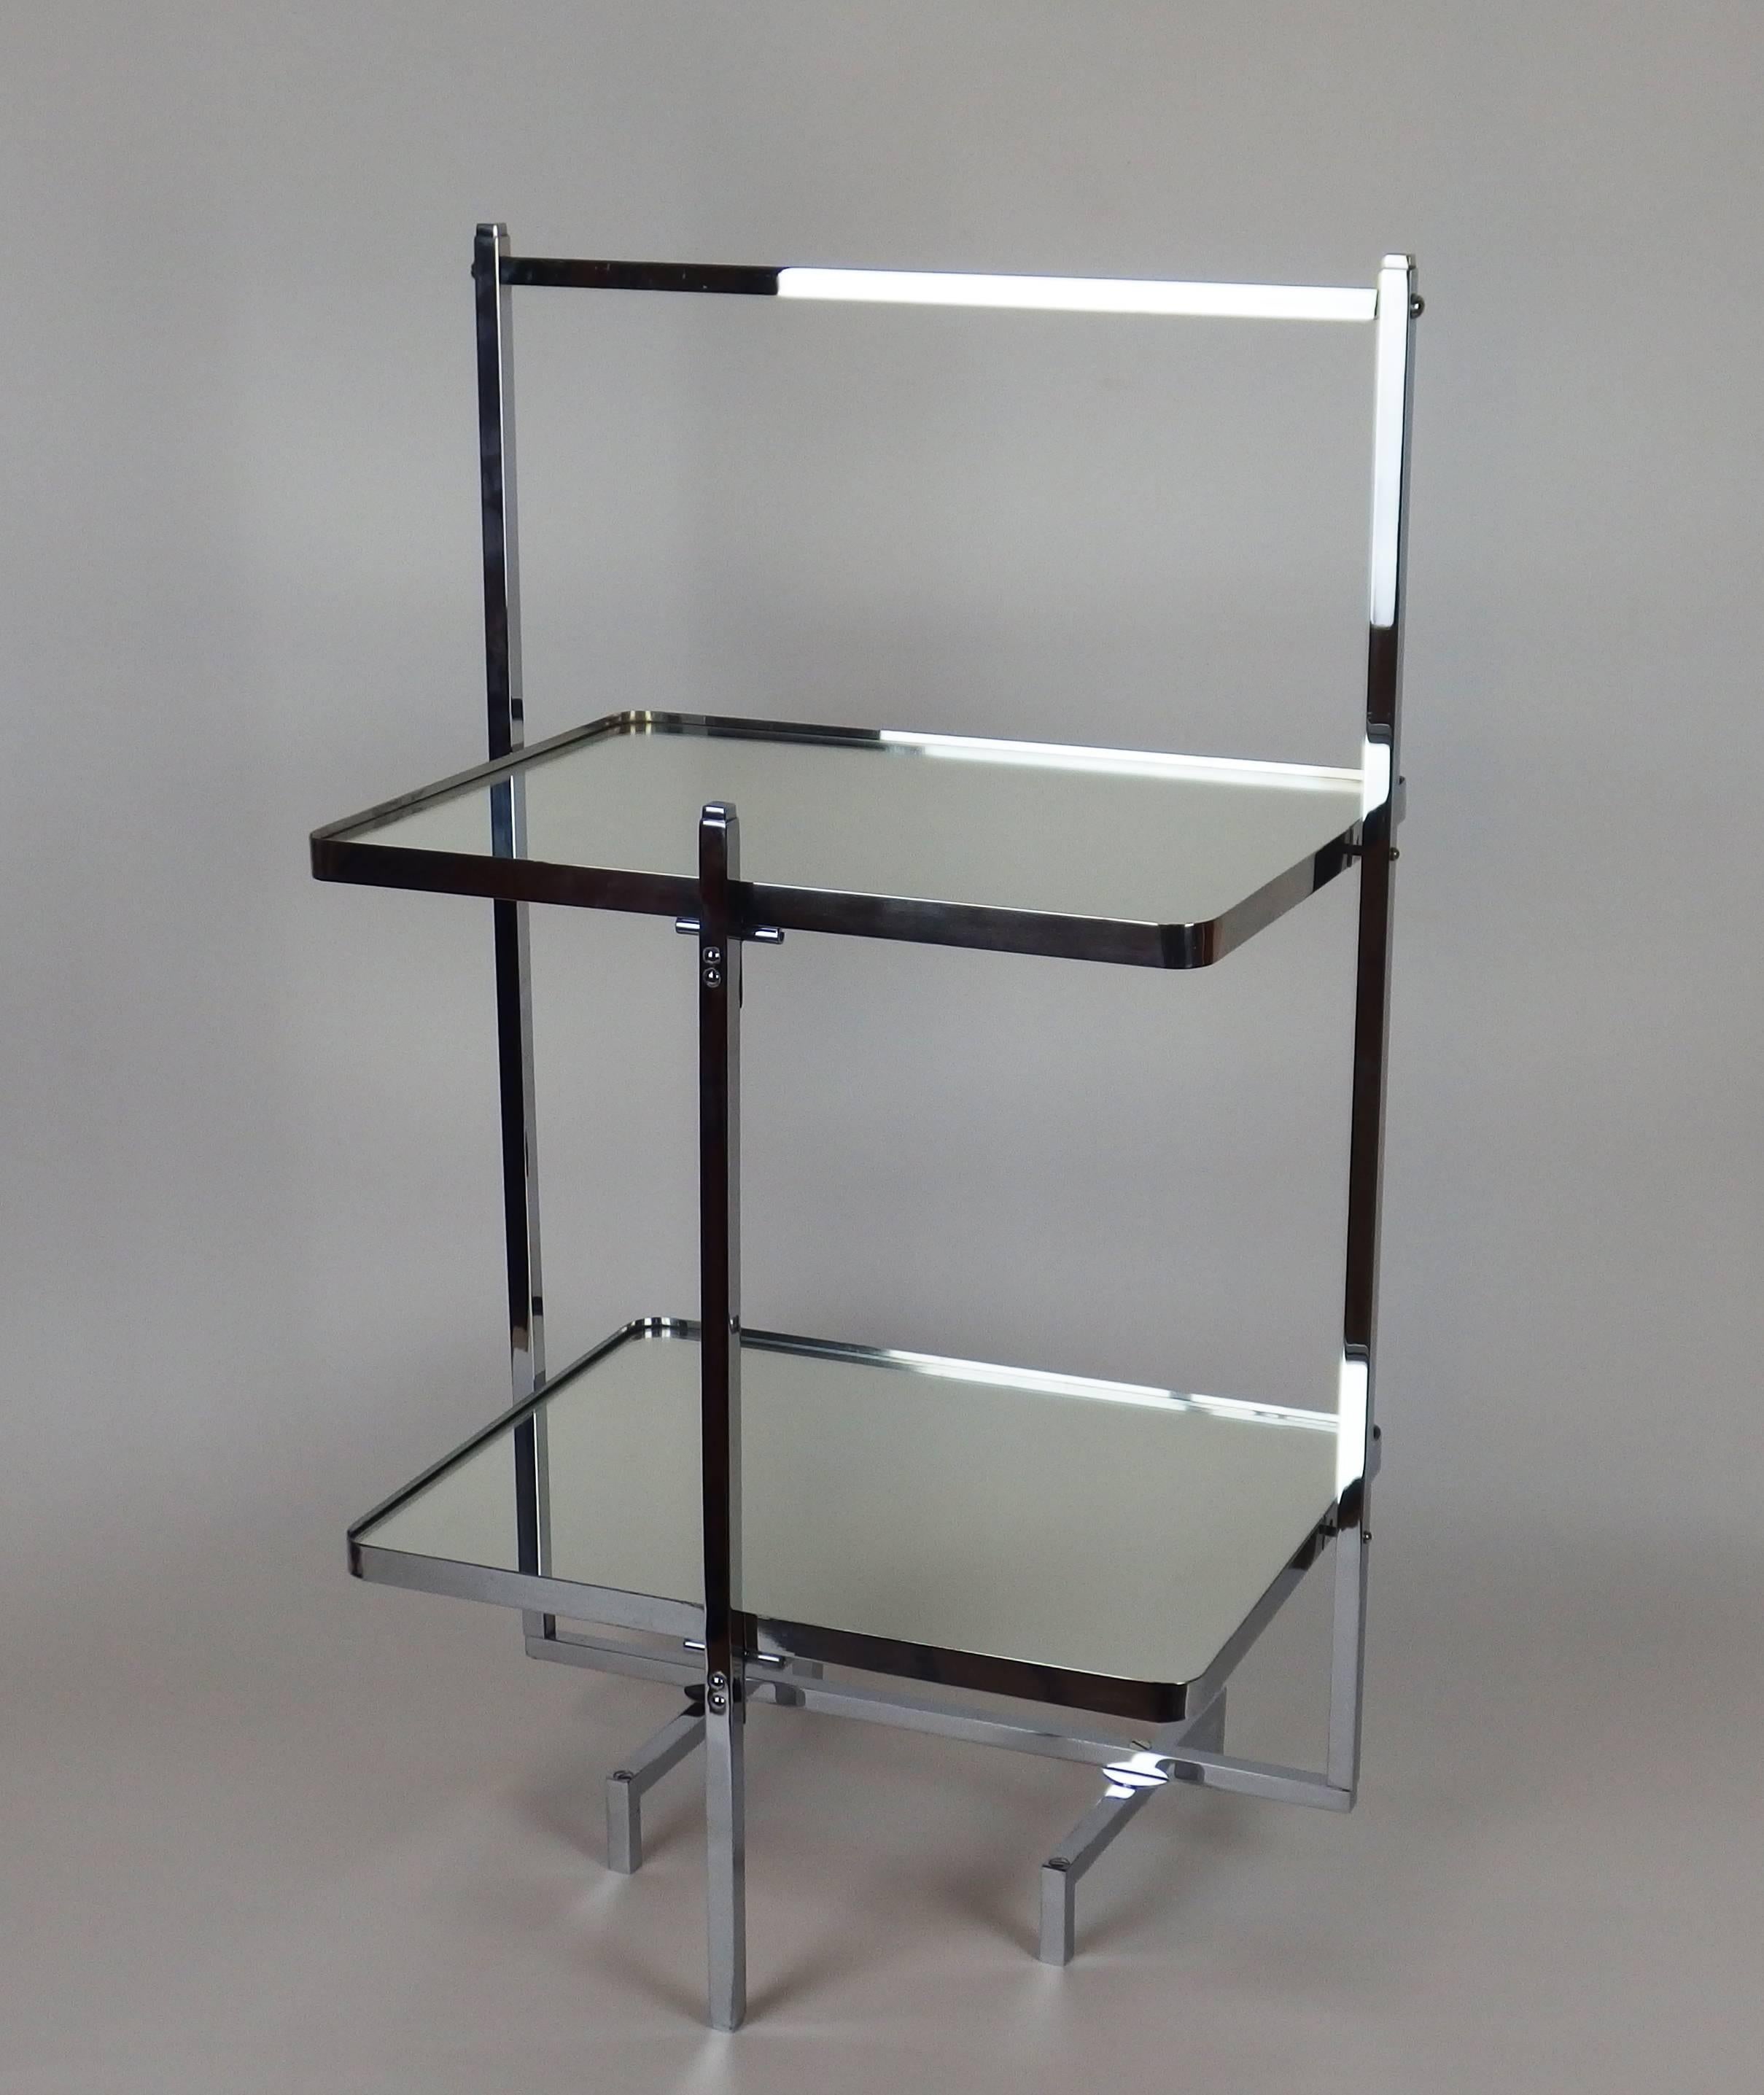 A chromed metal and mirrored glass dessert table with two rectangular trays pivoting on an angular support to fold the table.